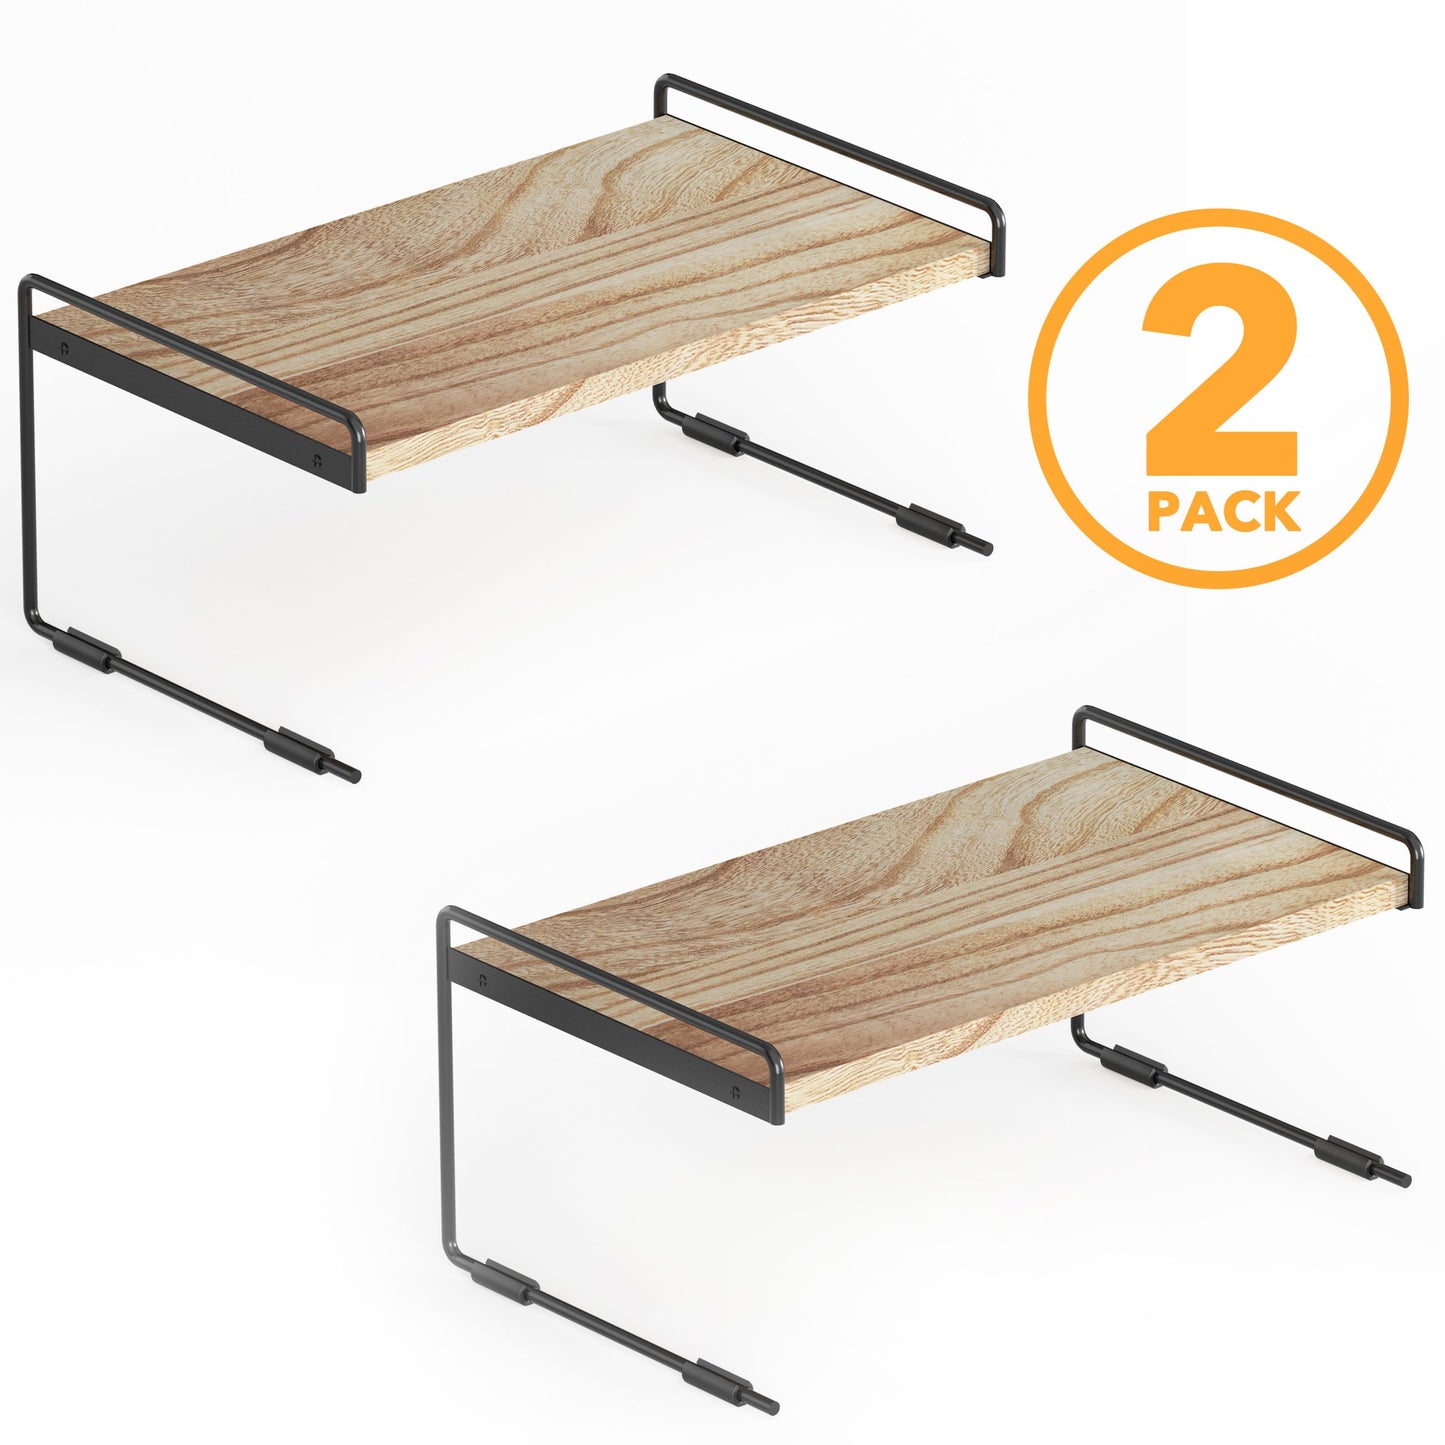 SpaceAid Open Kitchen Cabinet Shelf Organizers 2 Pack in Black and Natural, 16" Wide